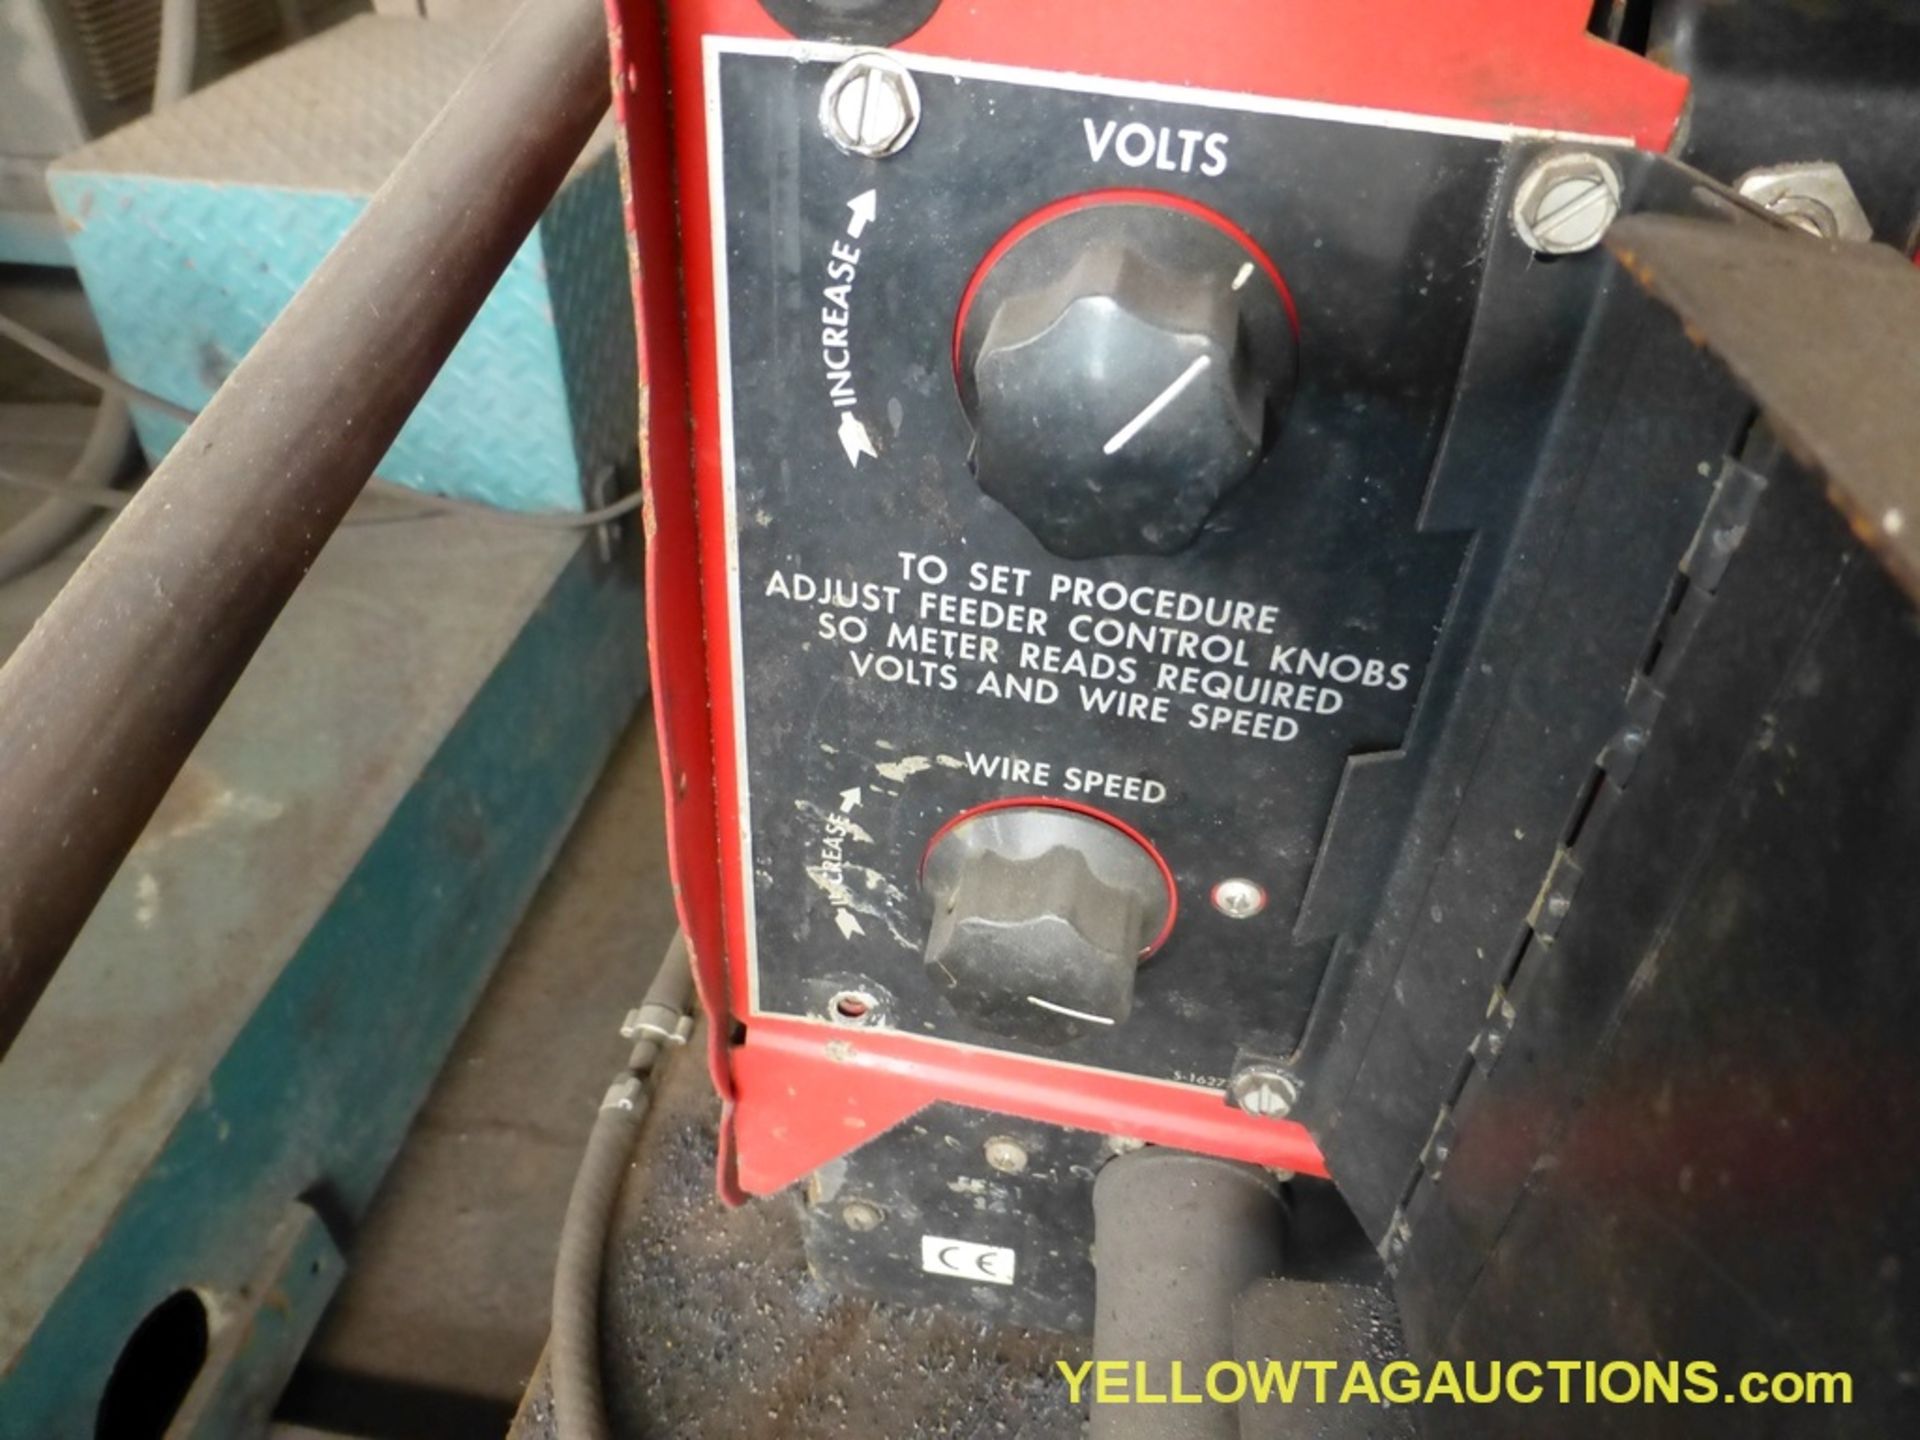 Lot of (2) Lincoln Electric Components | (1) Ideal Arc DC 600 Arc Welder Model No. DC600, Code No. 9 - Image 10 of 14